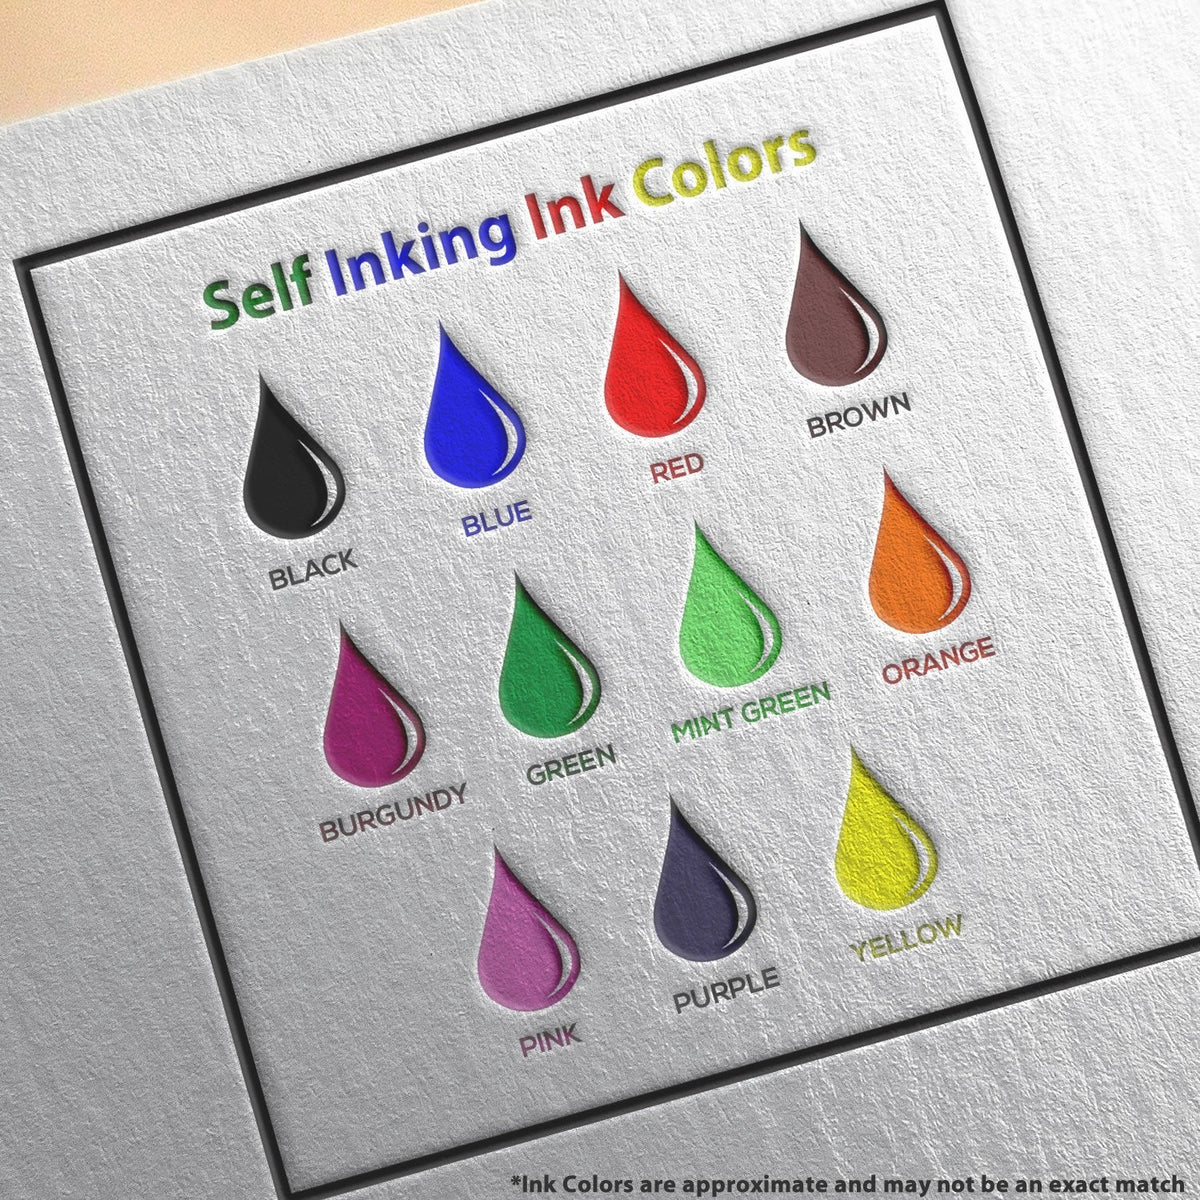 Self-Inking Much Better Keep Trying Stamp Ink Color Options